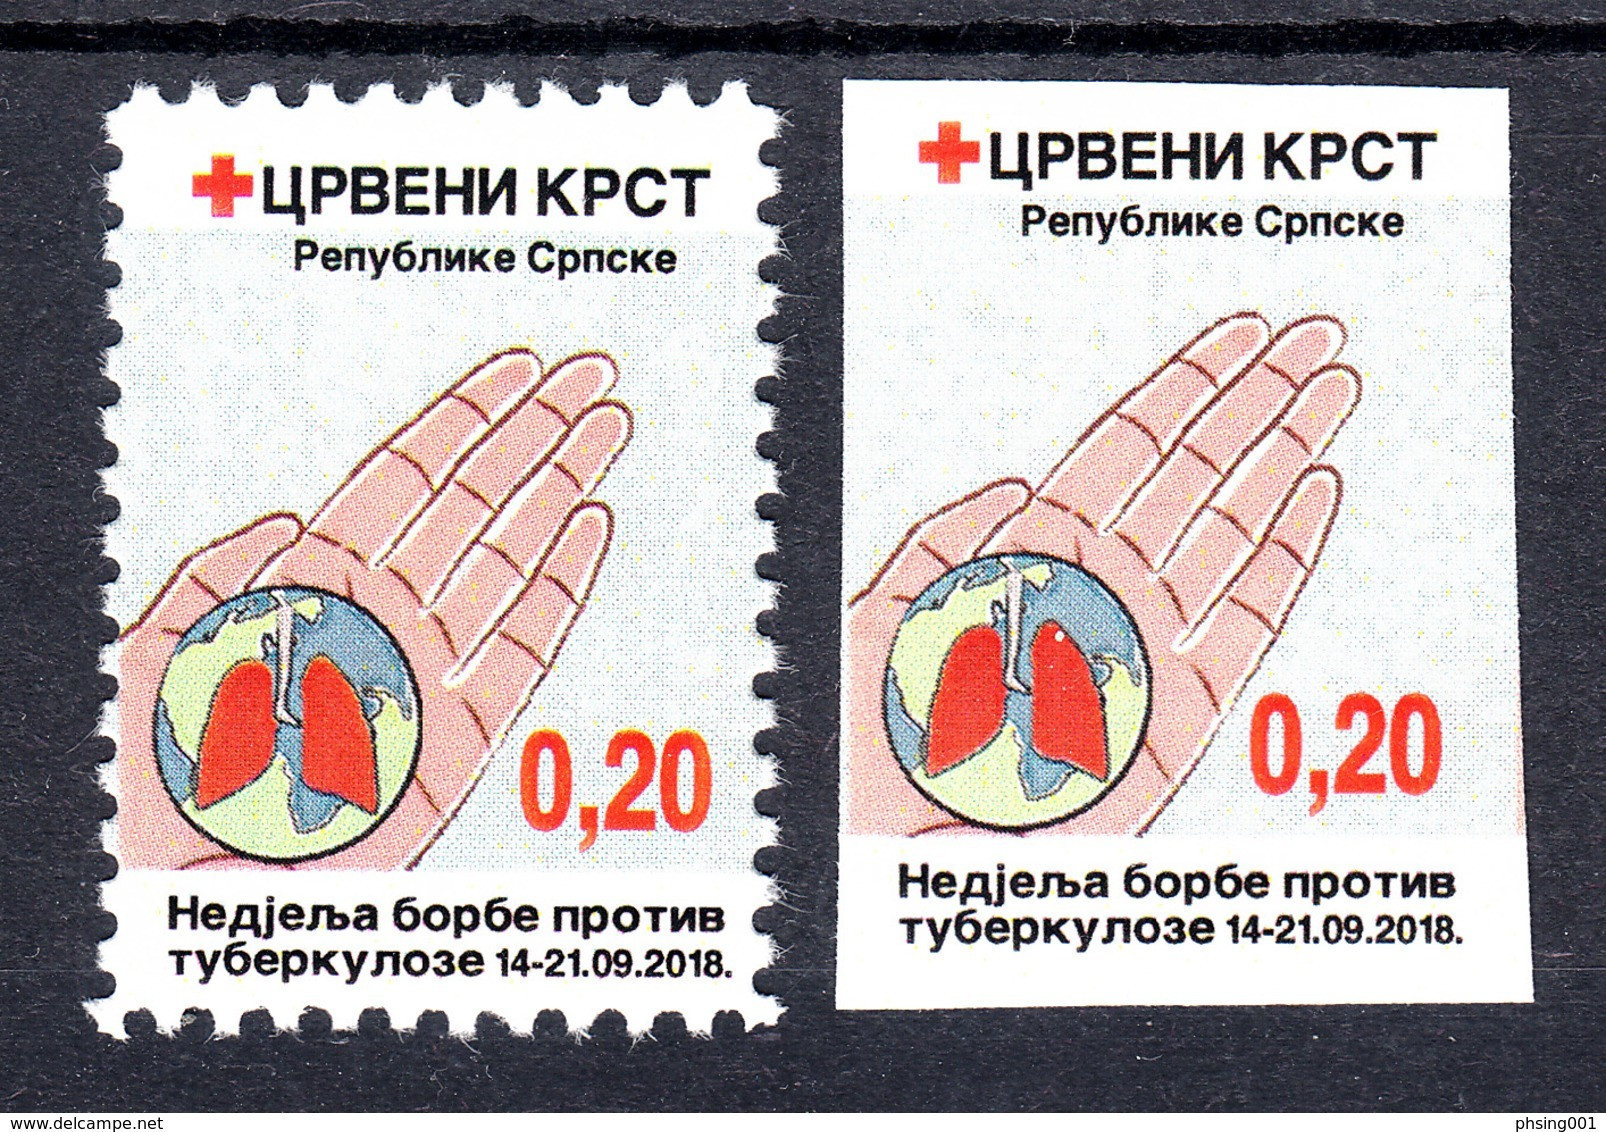 Bosnia Serbia 2018 TBC Red Cross Croix Rouge Rotes Kreuz, Tax Charity Surcharge, Perforated + Imperforated Stamp MNH - Red Cross